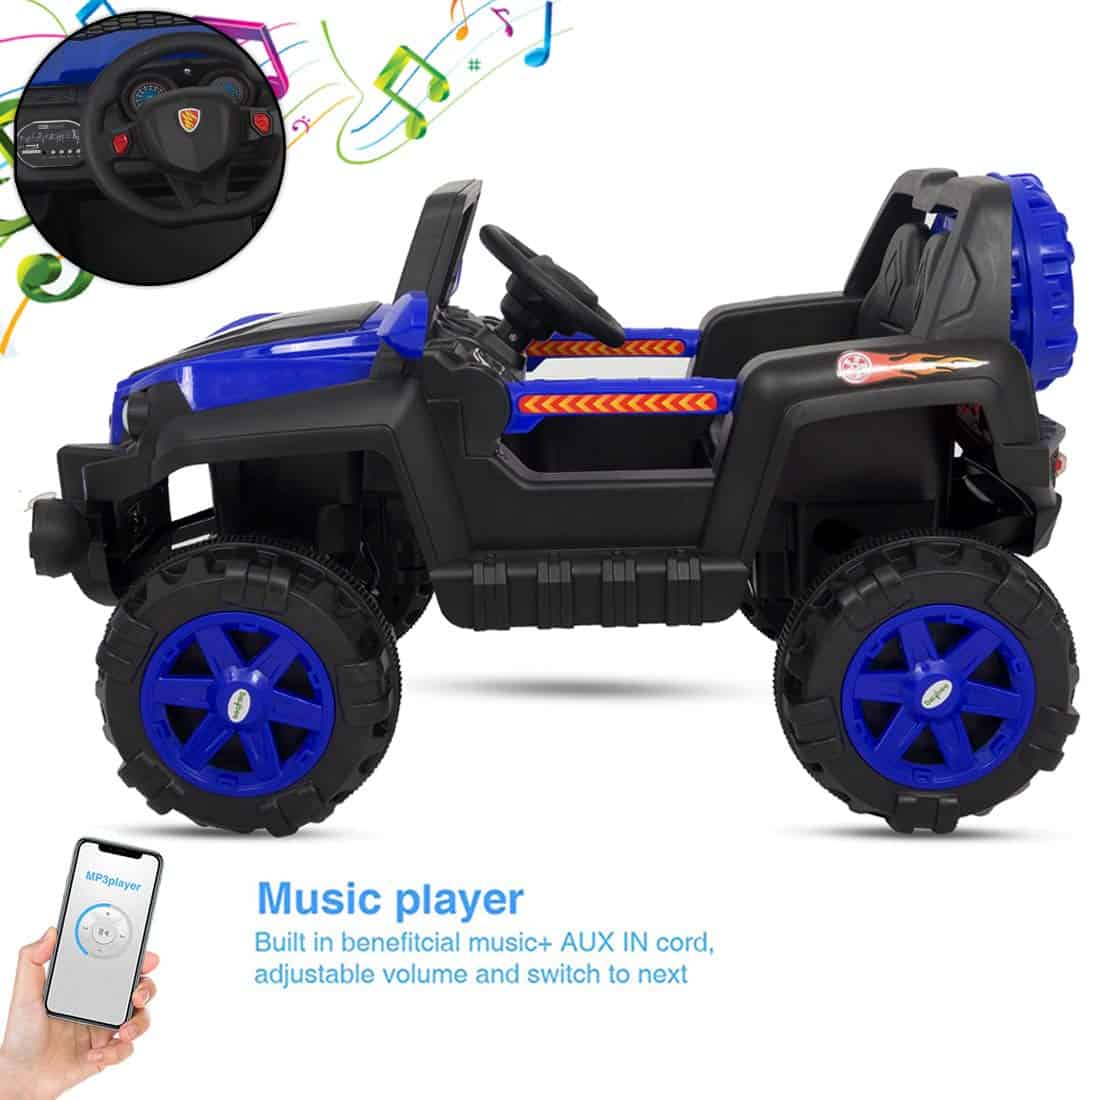 Warlock Baby Toy Car Rechargeable Battery Operated Ride on car for Kids/Baby with R/C Jeep Children Car Electric Motor Car Kids Cars,Baby Racing Car for Boys & Girls Age 2 to 6 Years